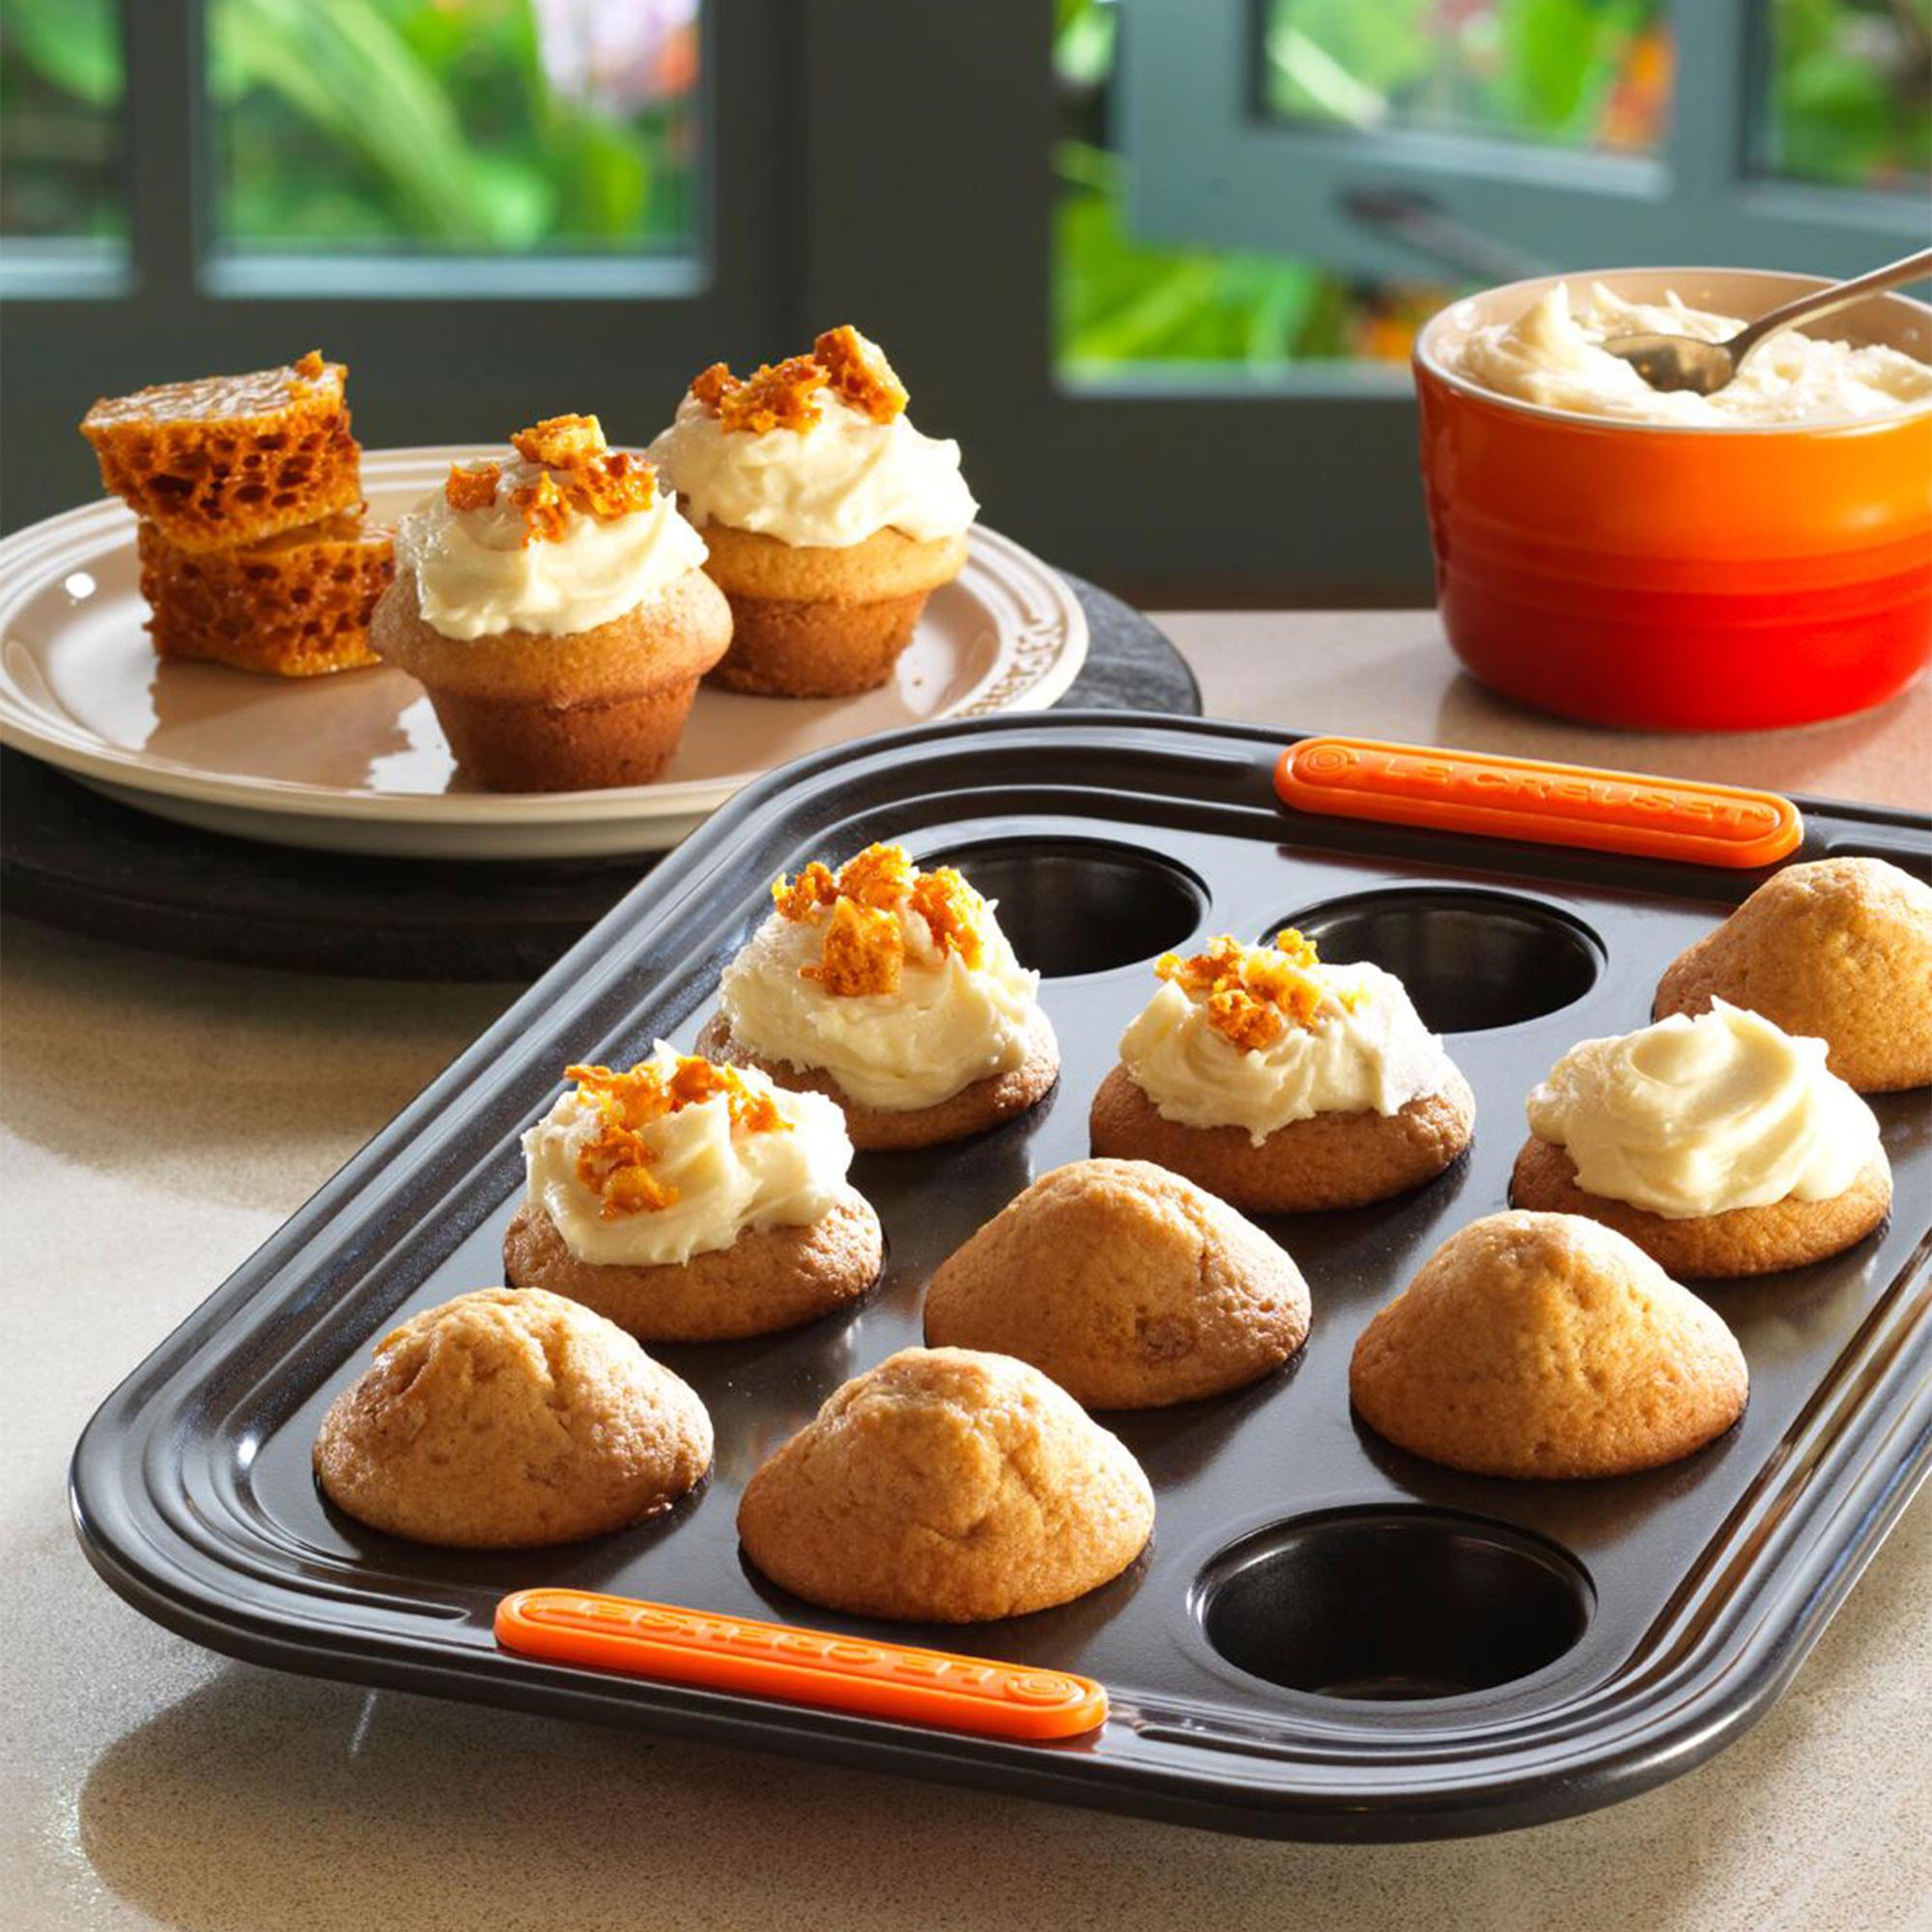 Le Creuset Toughened Non Stick Muffin Tray 12 Cup Image 3